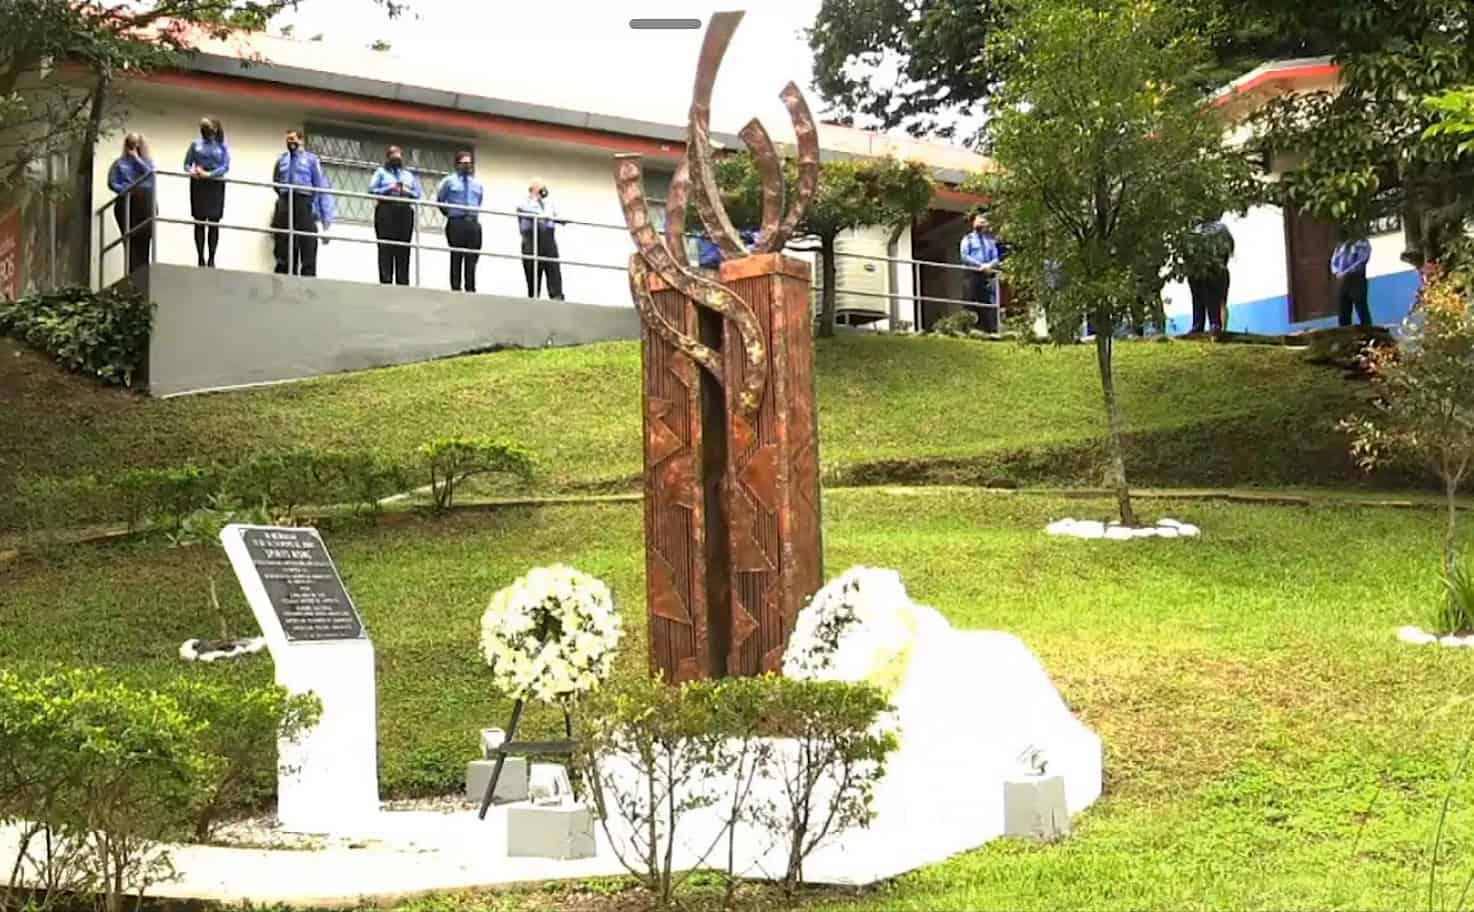 The “Spirit Rising” monument in Costa Rica honors the victims of the September 11 terrorist attacks.